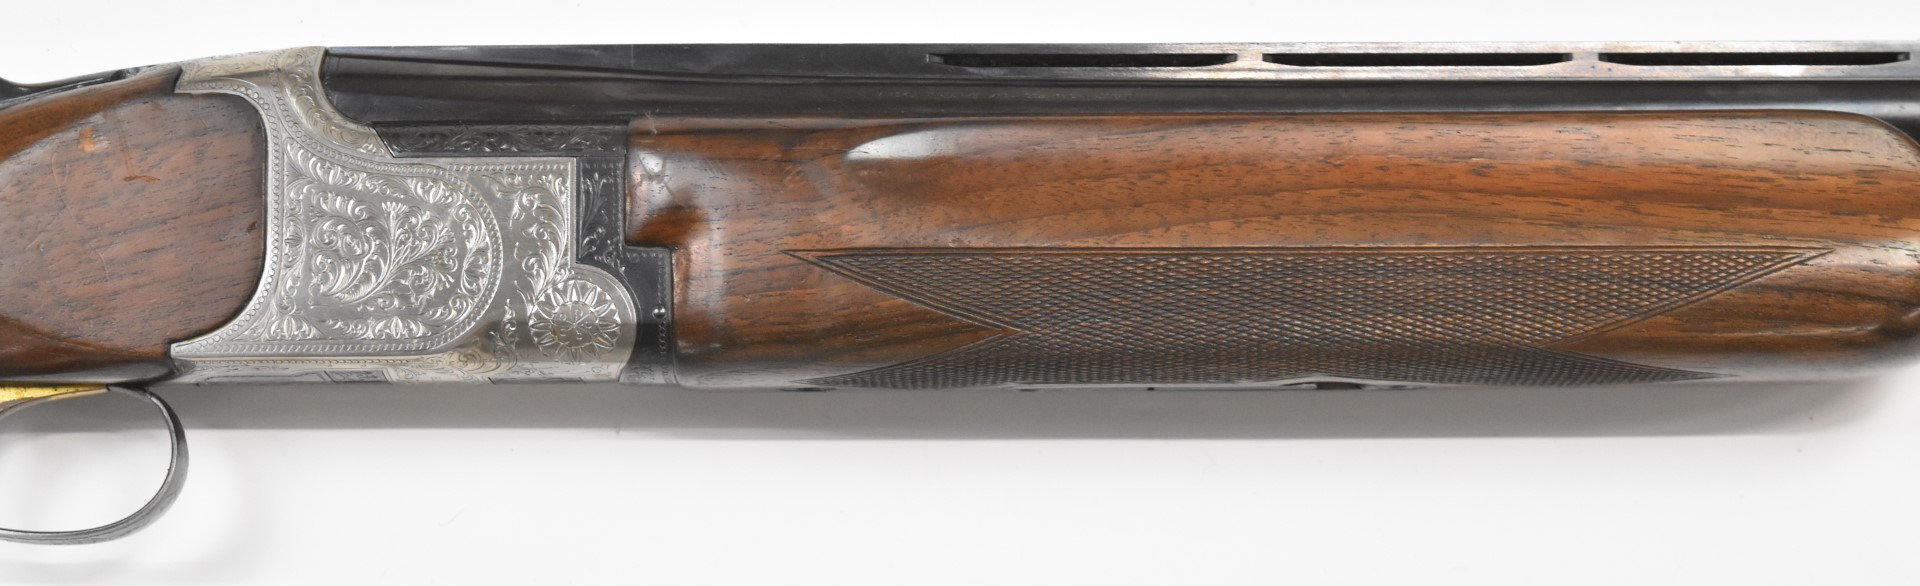 Miroku 12 bore over and under ejector shotgun with engraved locks, underside, trigger guard, top - Image 4 of 11